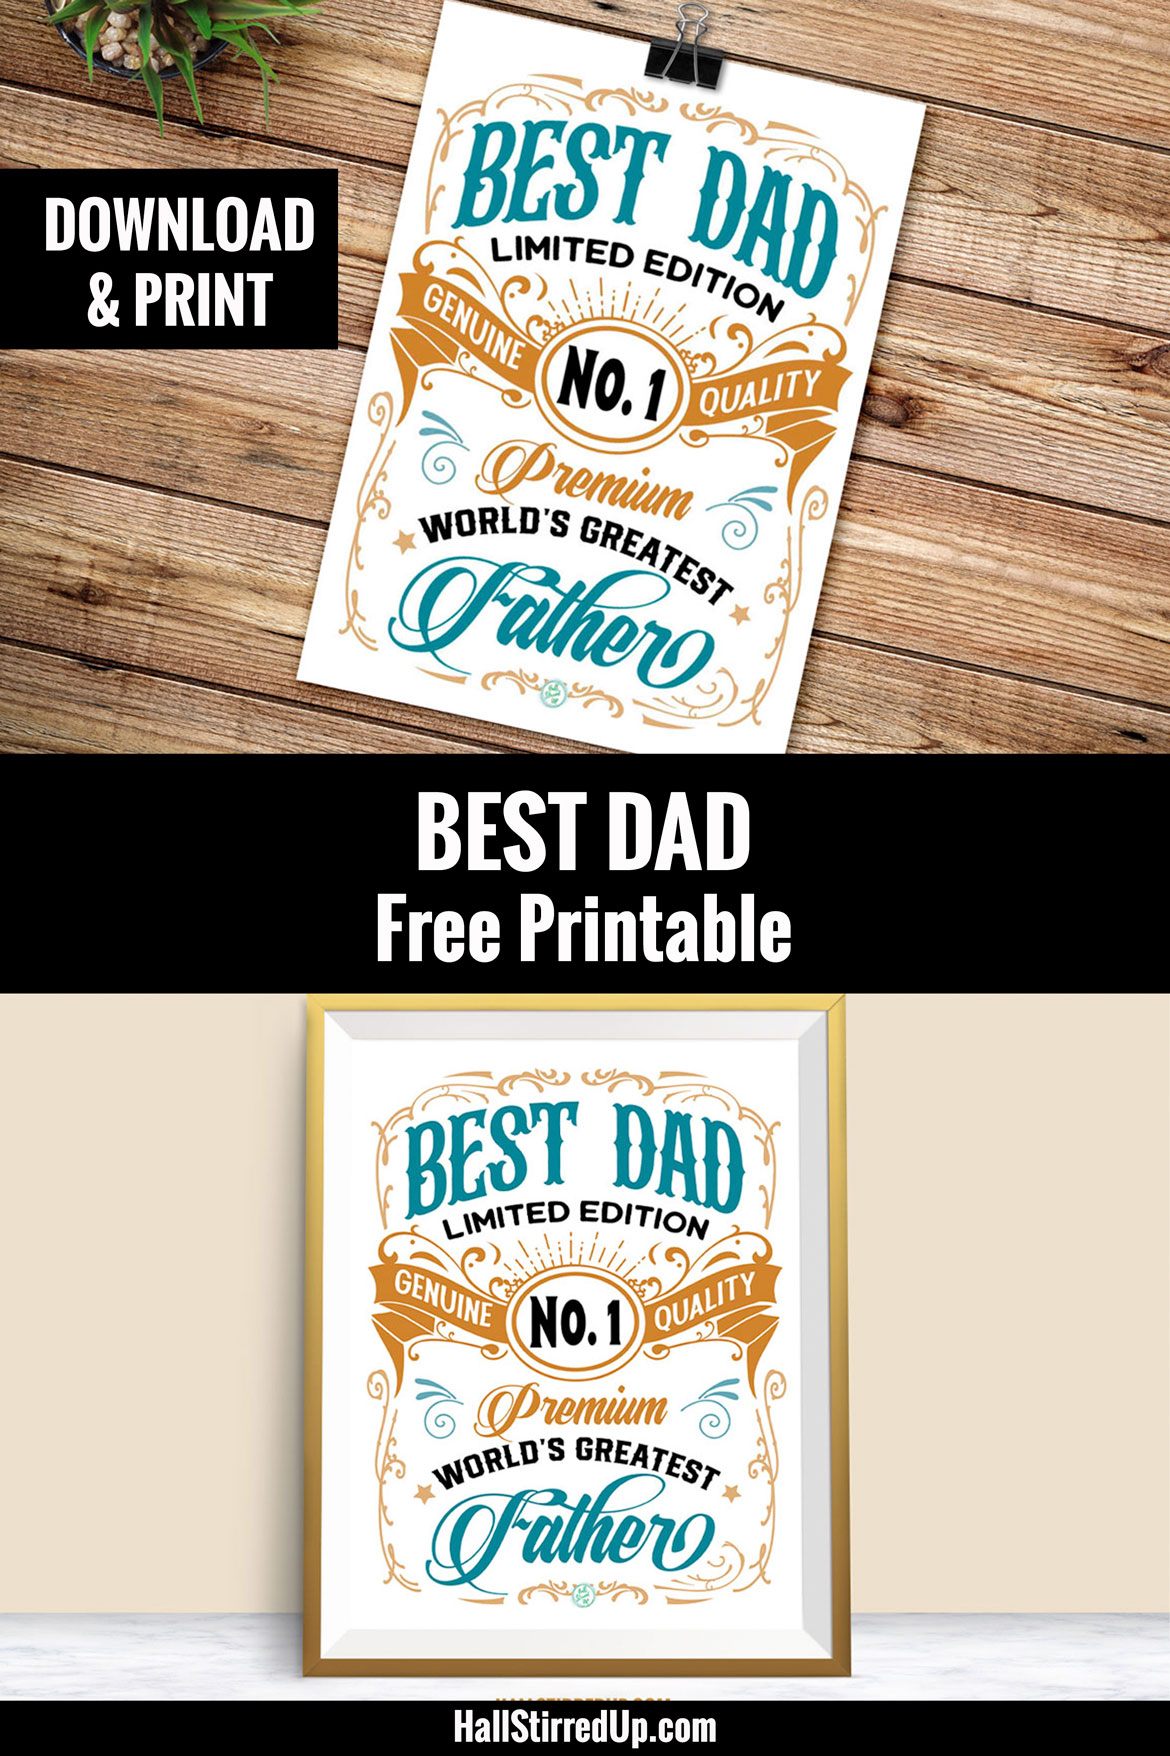 Your dad is the greatest and deserves a printable award!